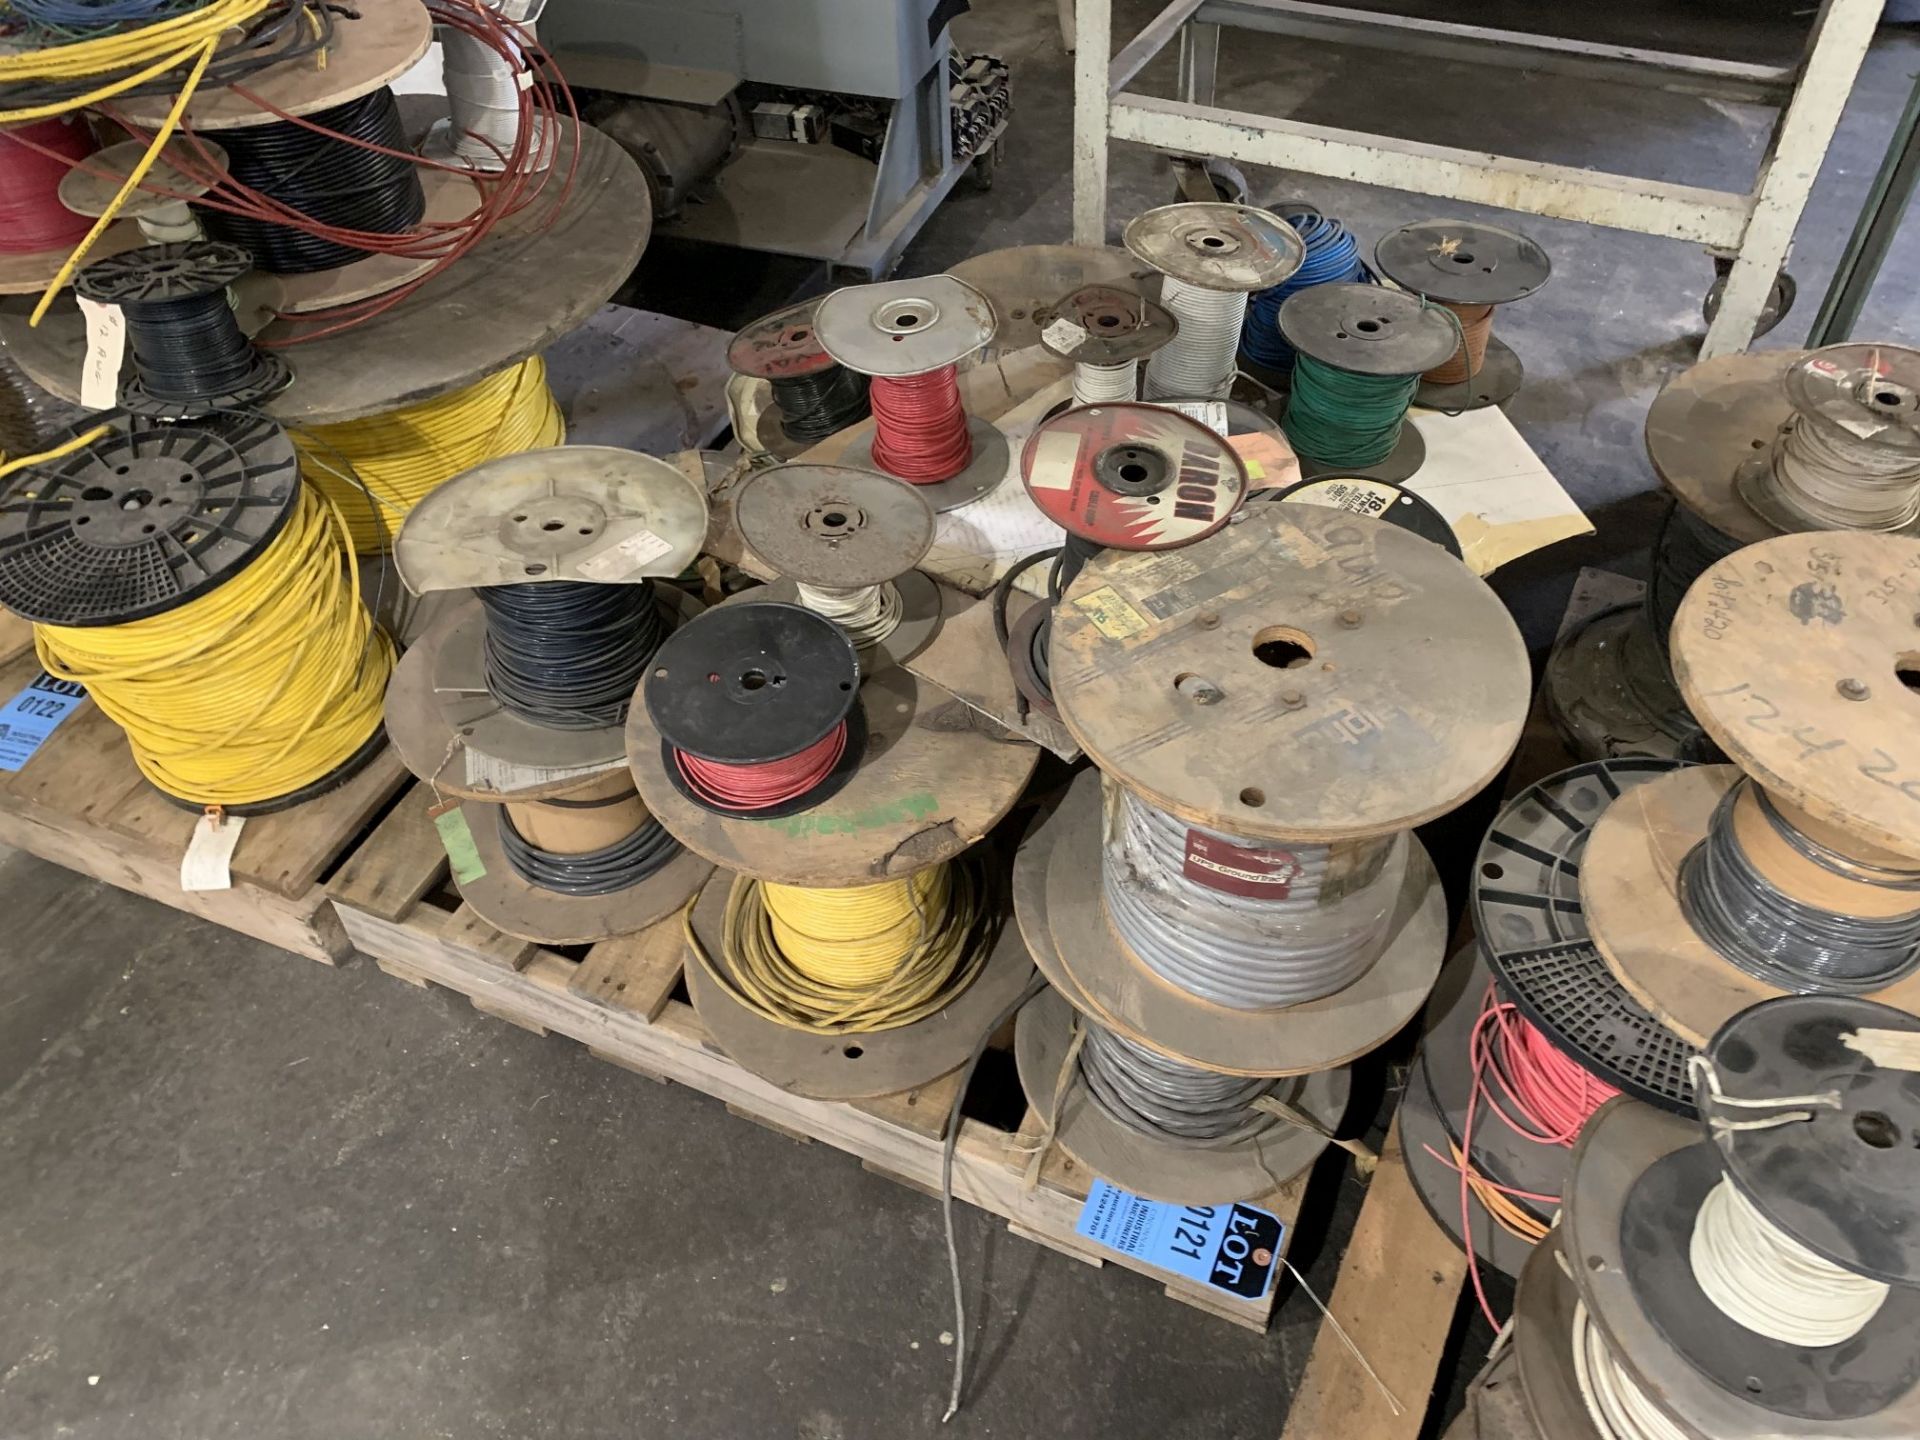 SKID W/ MISC. ELECTRICAL WIRE REELS